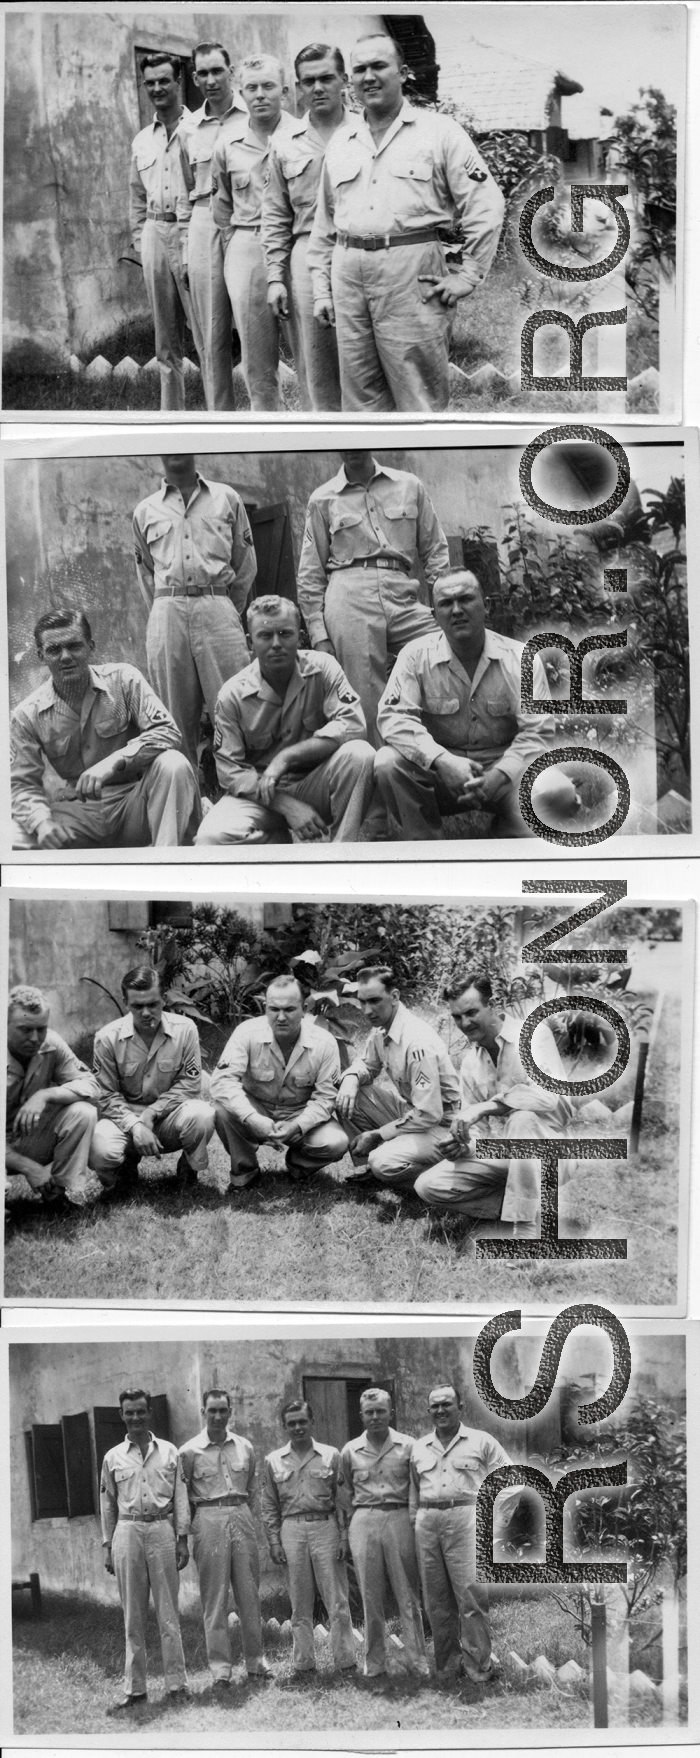 Boys of the 2005th Ordnance Maintenance Company,  28th Air Depot Group, in various poses--possibly showing of new sergeant stripes--in India or Burma. During WWII.